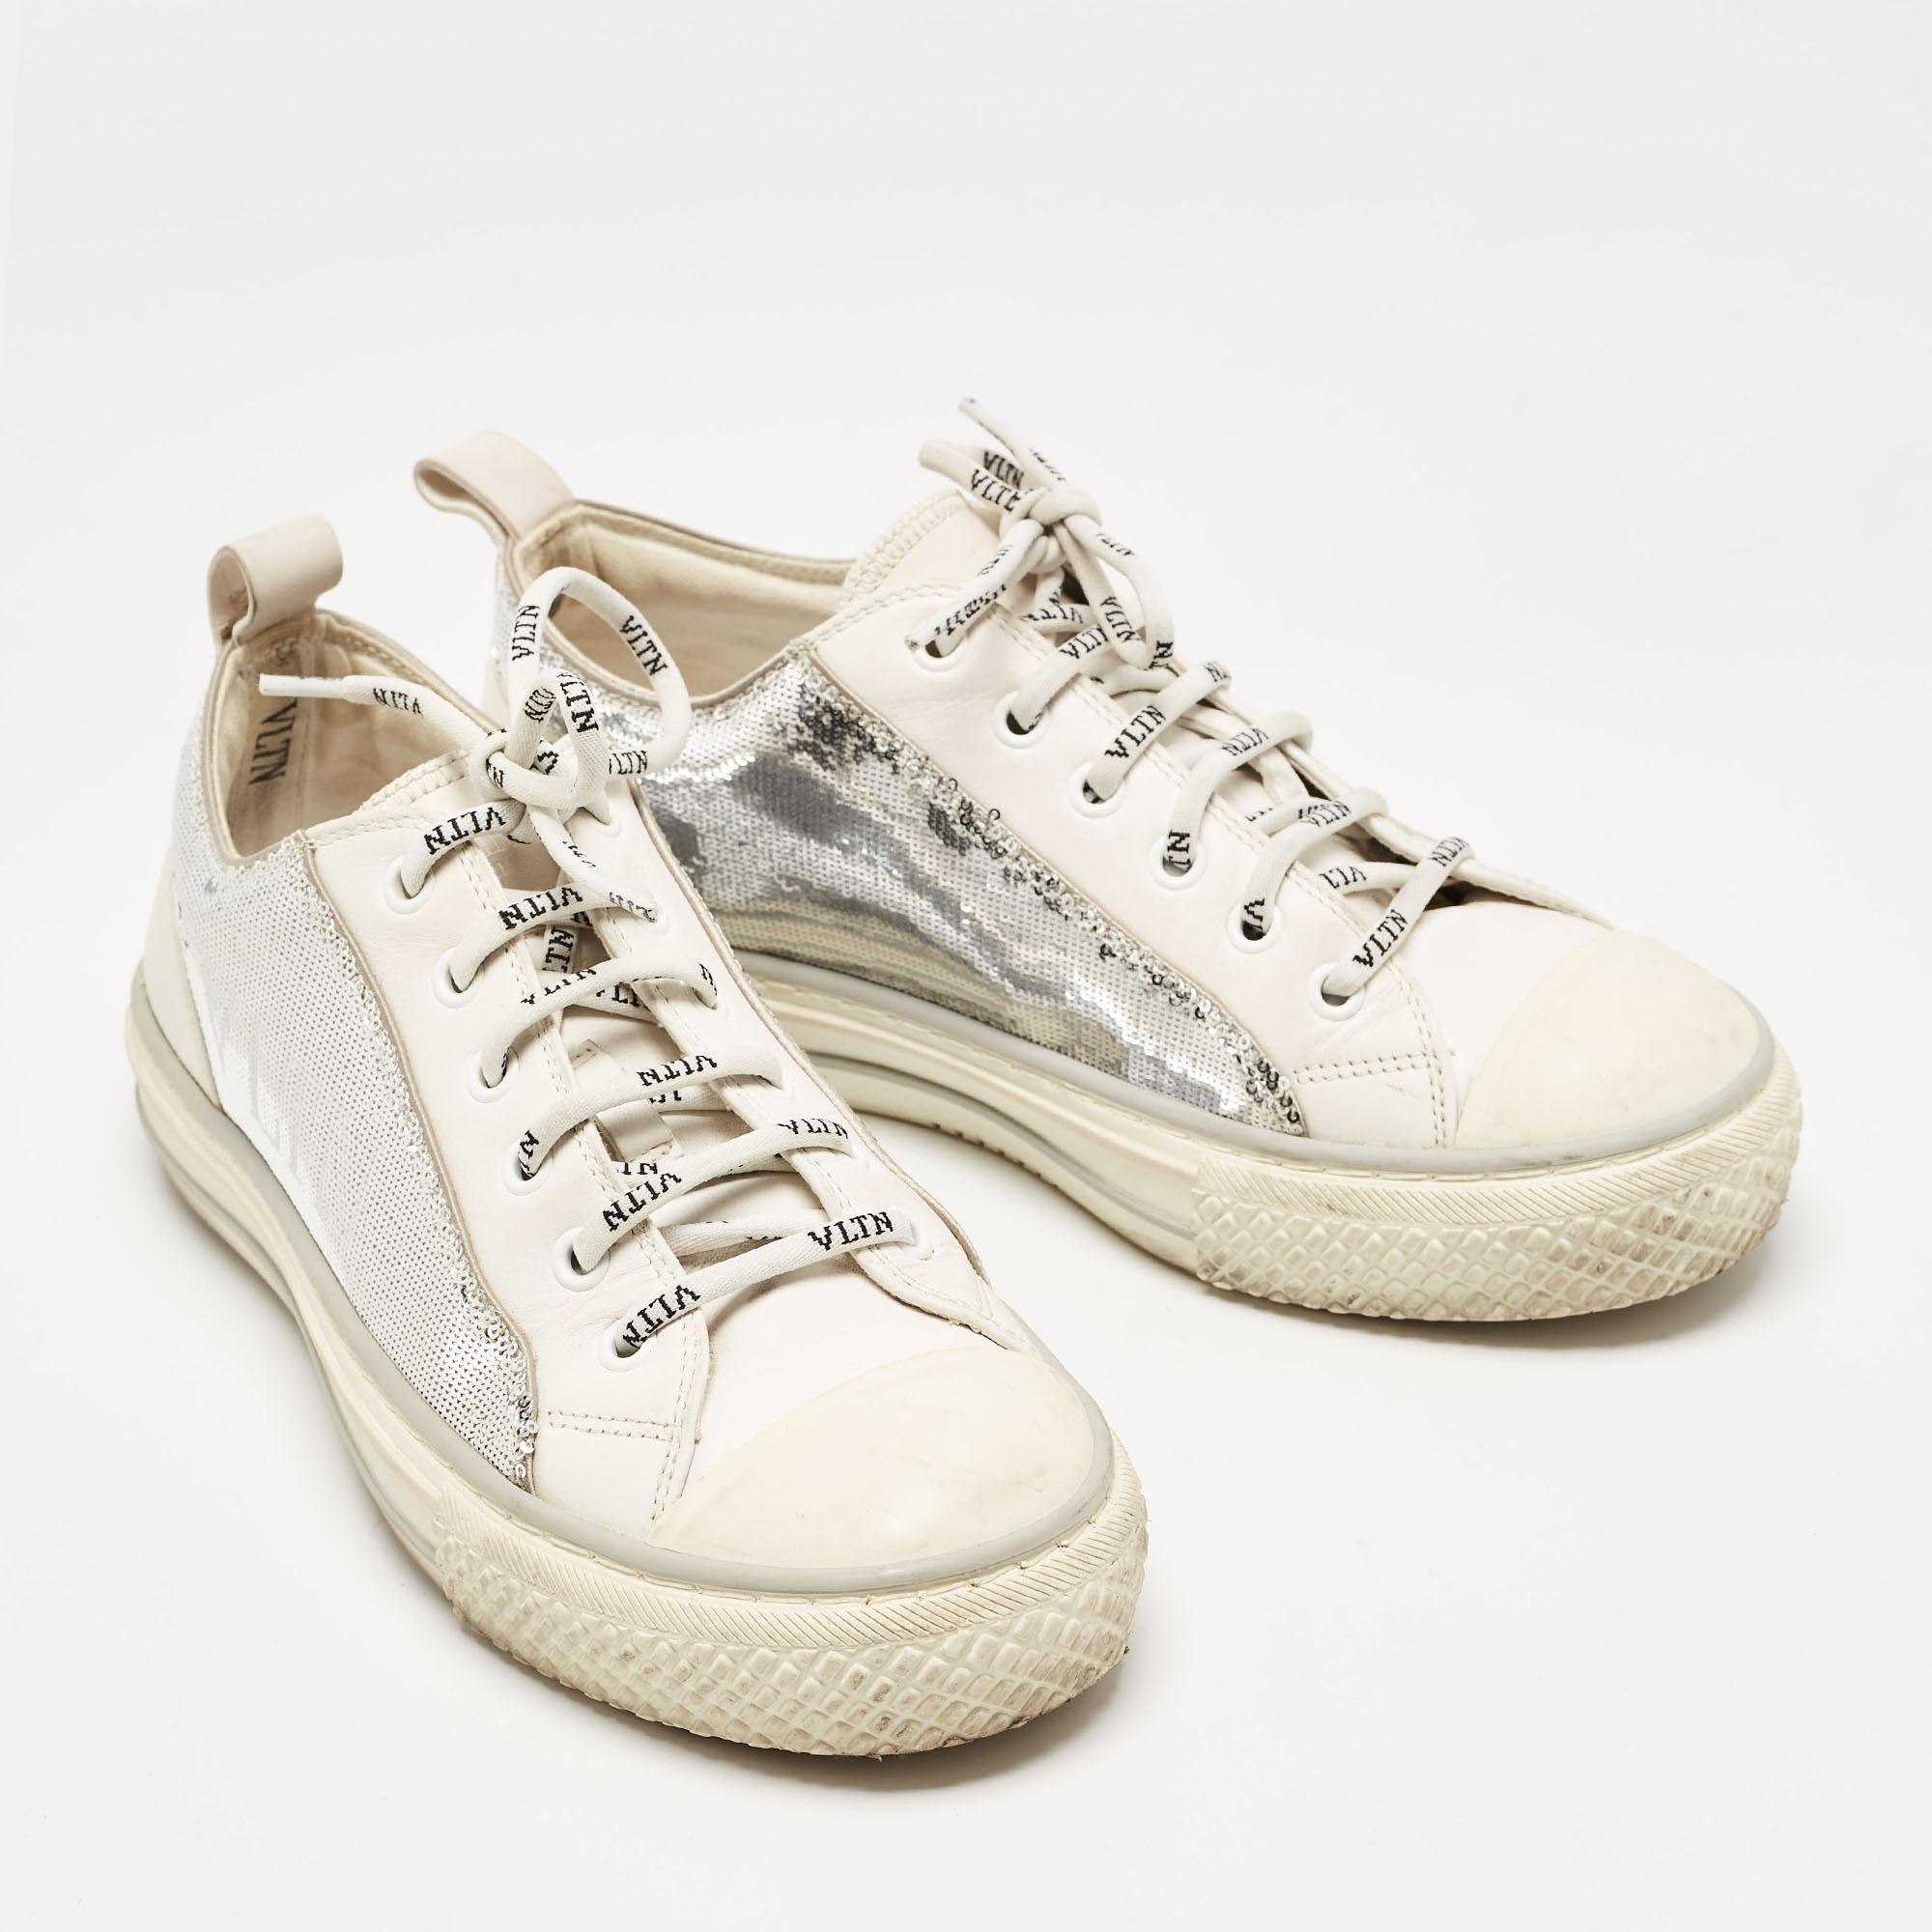 Valentino Silver/White Leather and Sequins Lace Up Sneakers Size 36 In Good Condition For Sale In Dubai, Al Qouz 2